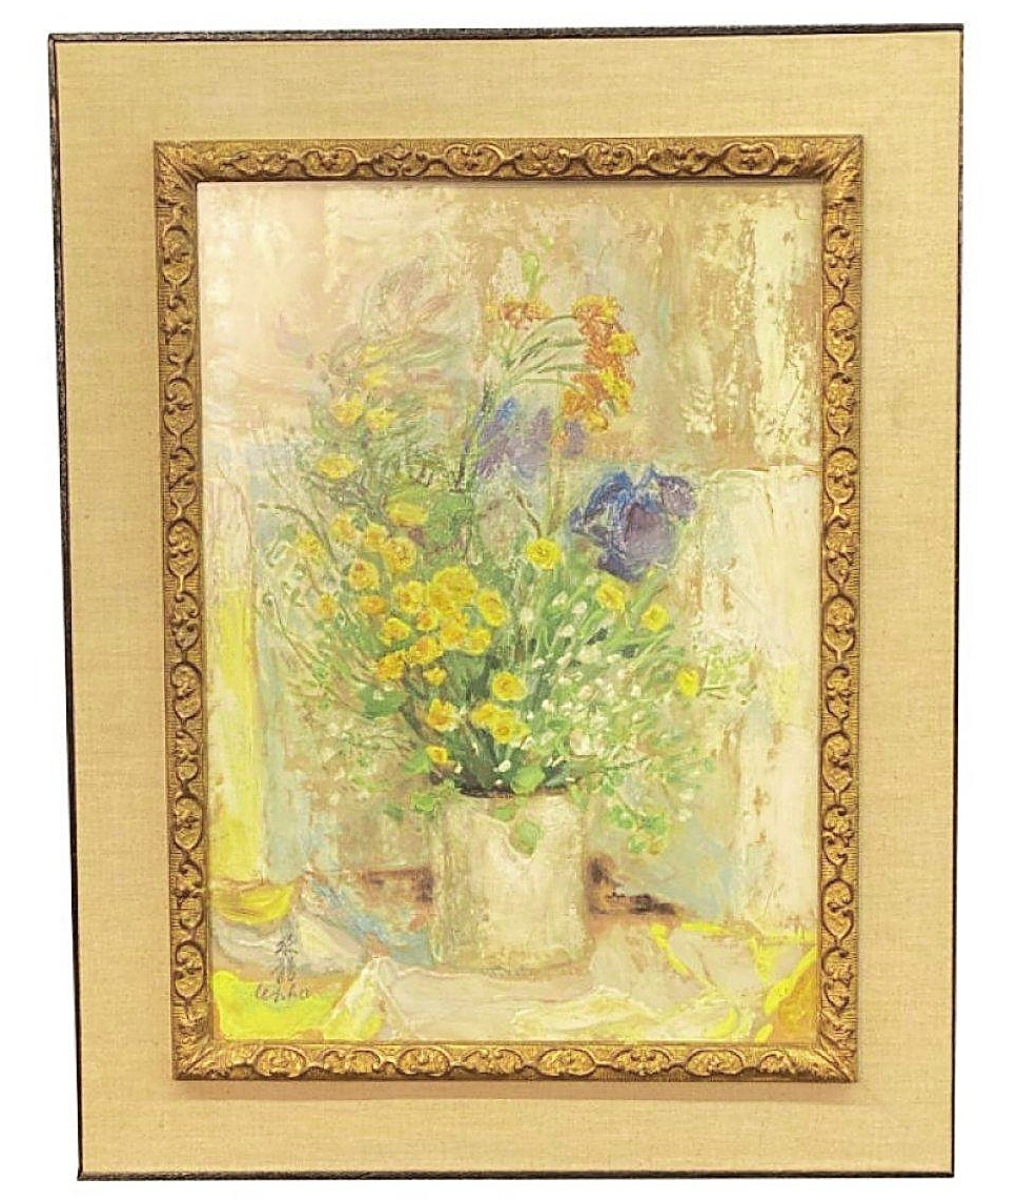 A buyer in the New York City metropolitan area fought off international competition and plucked this tempera on board floral still life by Le Pho (Vietnamese-French, 1907-2001) for $37,200 ($4/8,000).